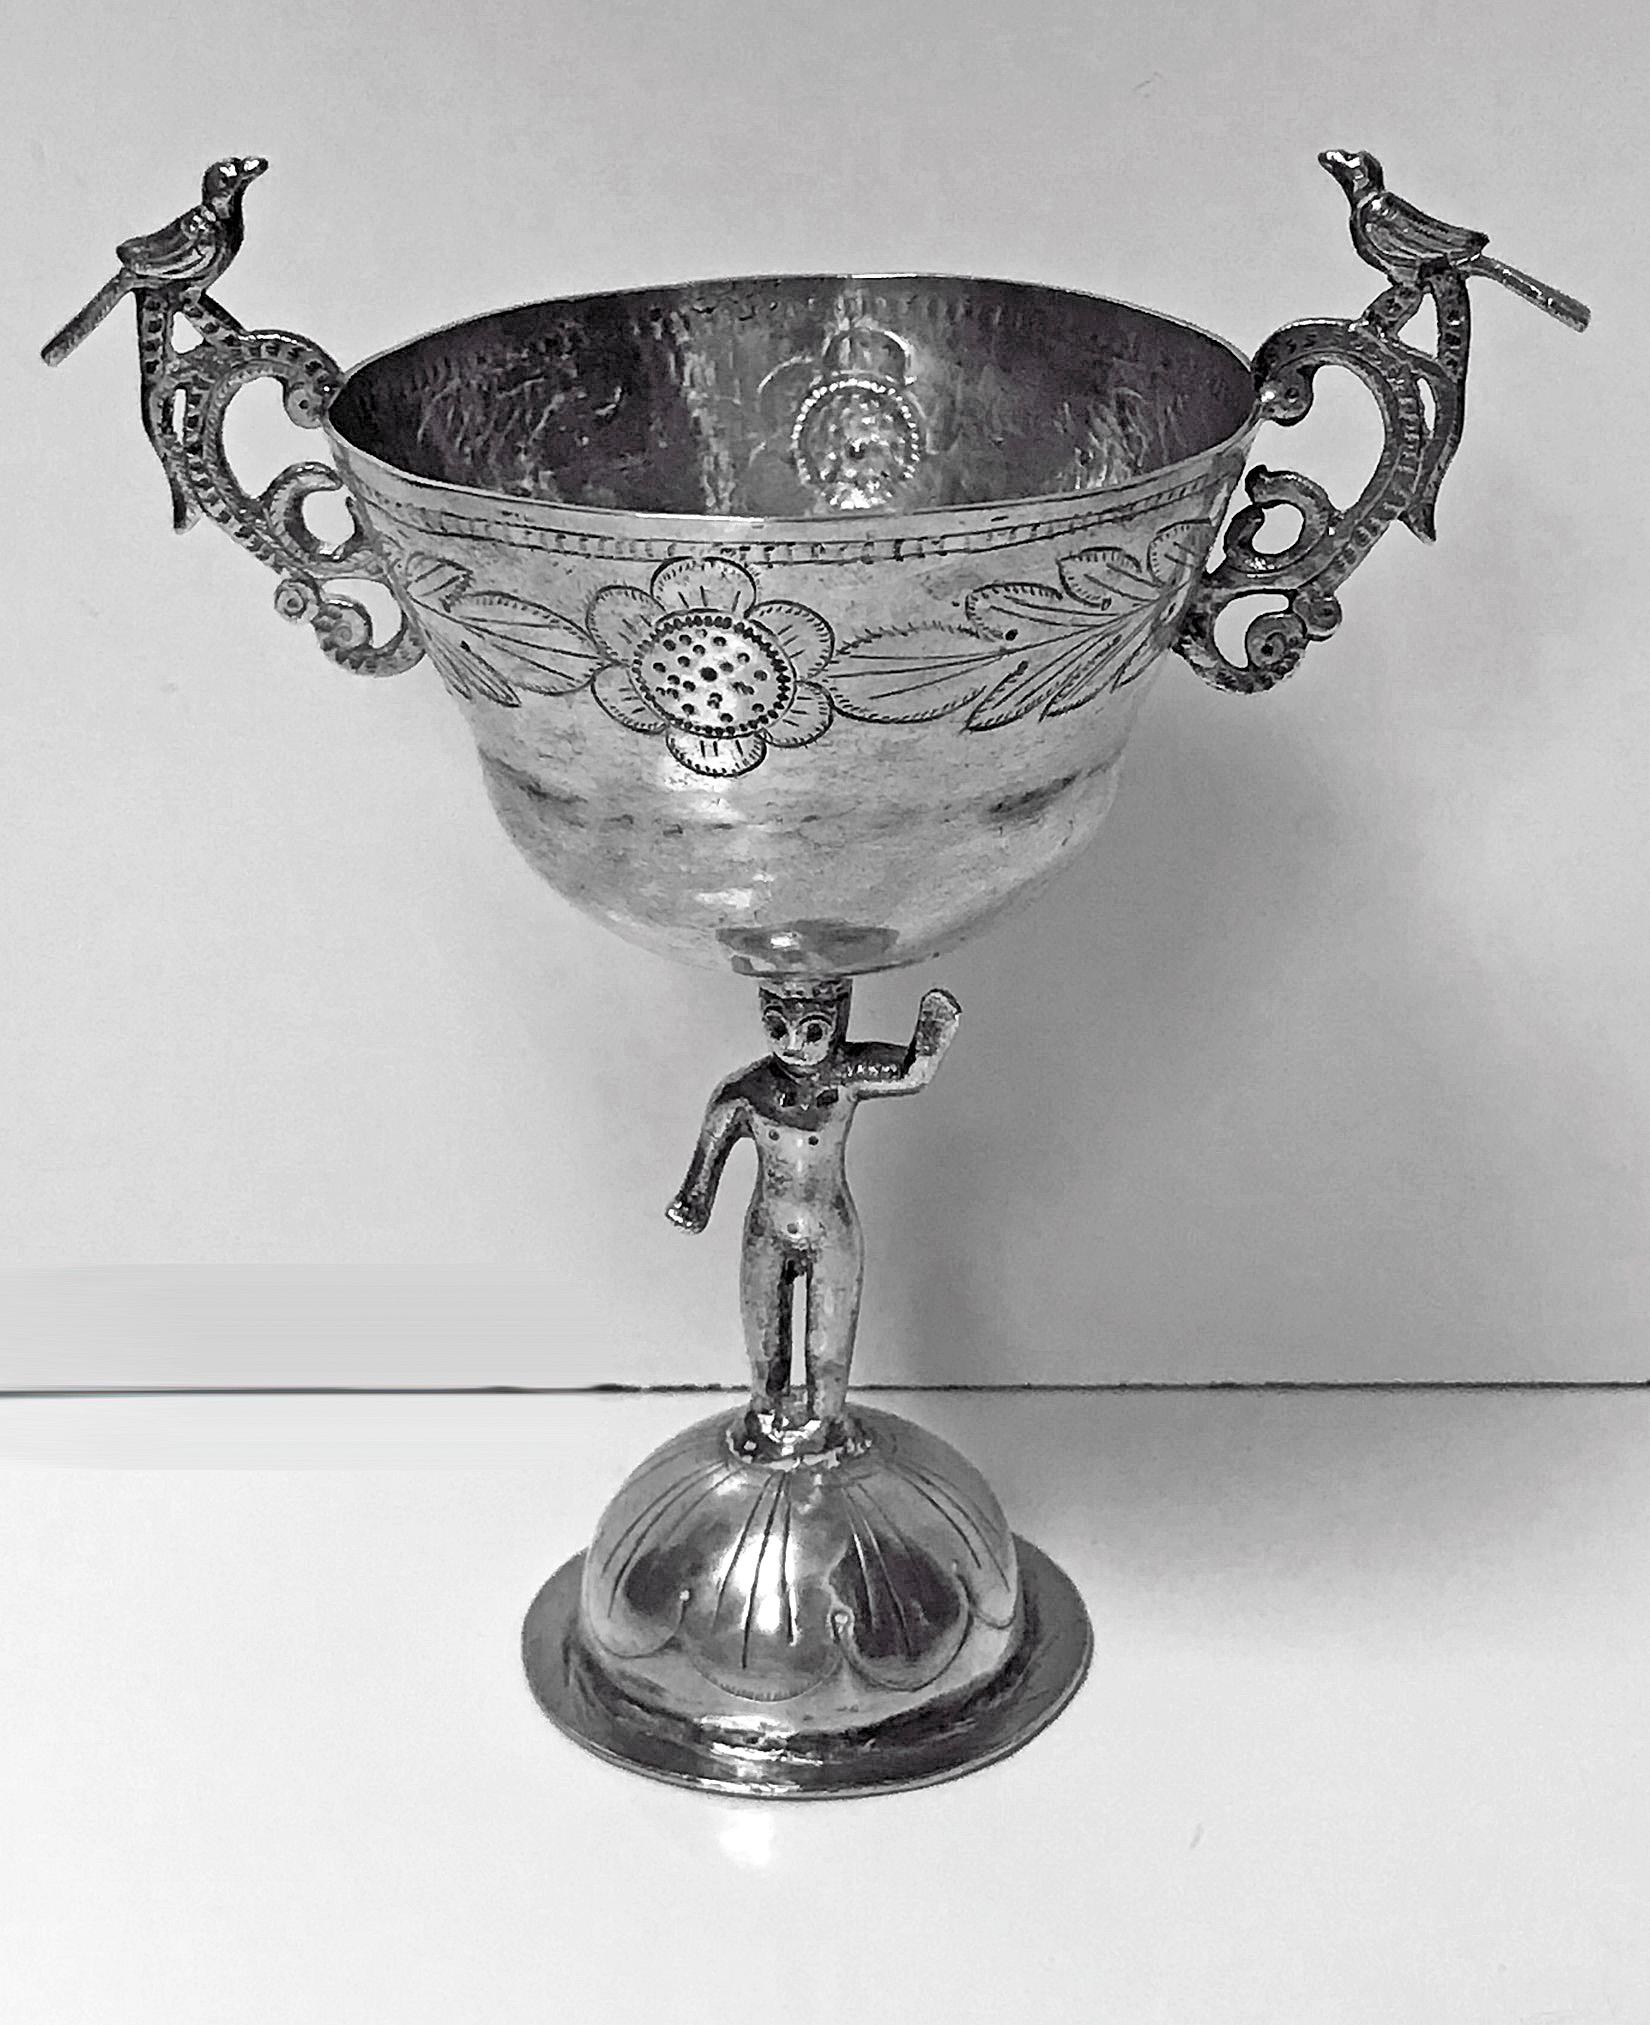 18th century Spanish colonial silver chalice cup. The cup on dome base supported on a figural column stem and cup with engraved flower and leaf pattern surround, the handles in the shape of birds surmounted on foliage either side of cup. Peru or